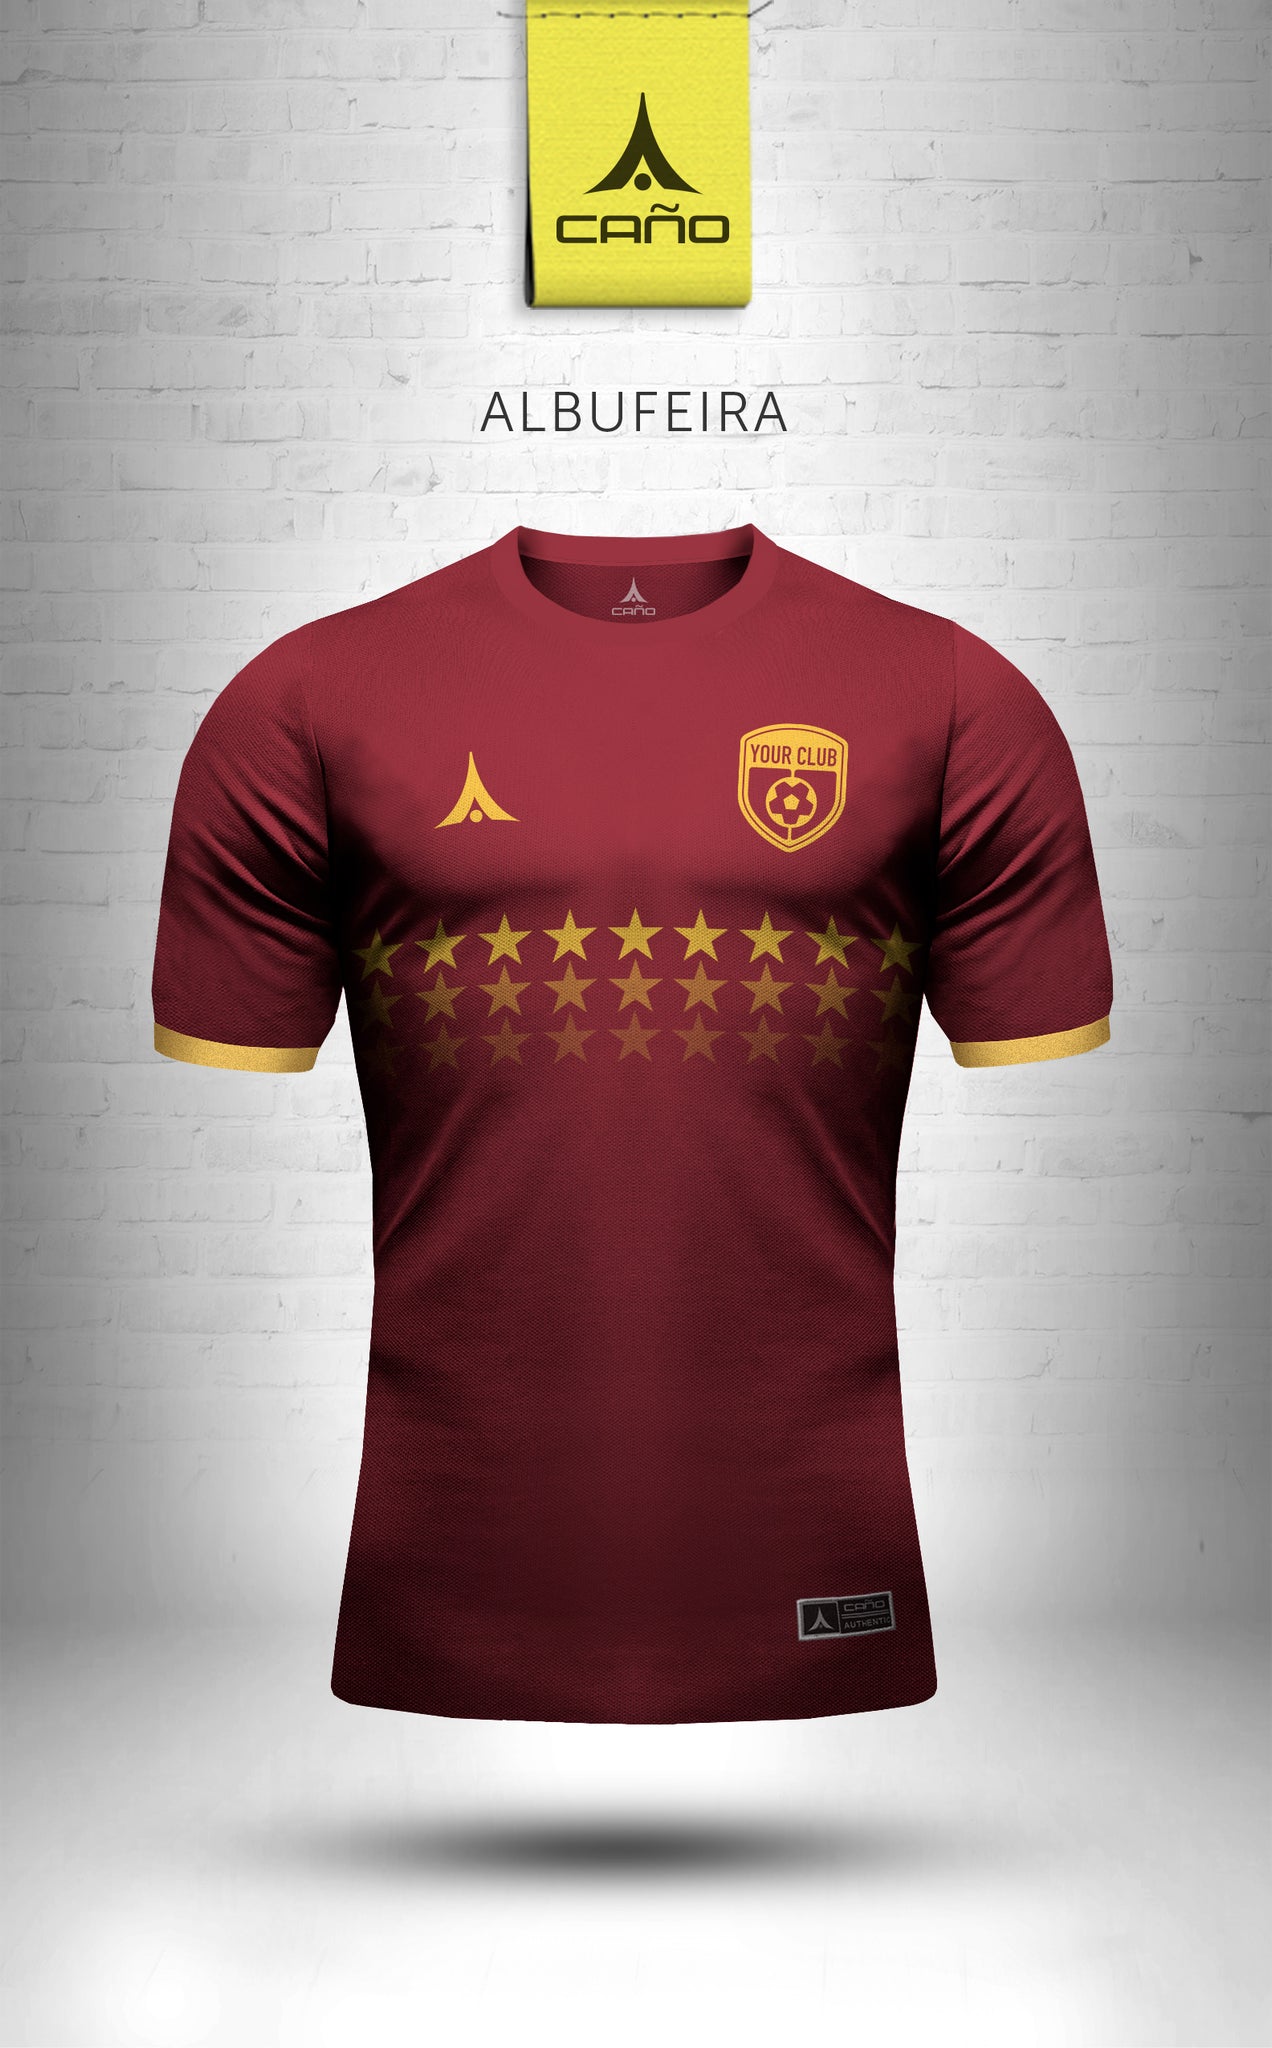 maroon and gold jersey